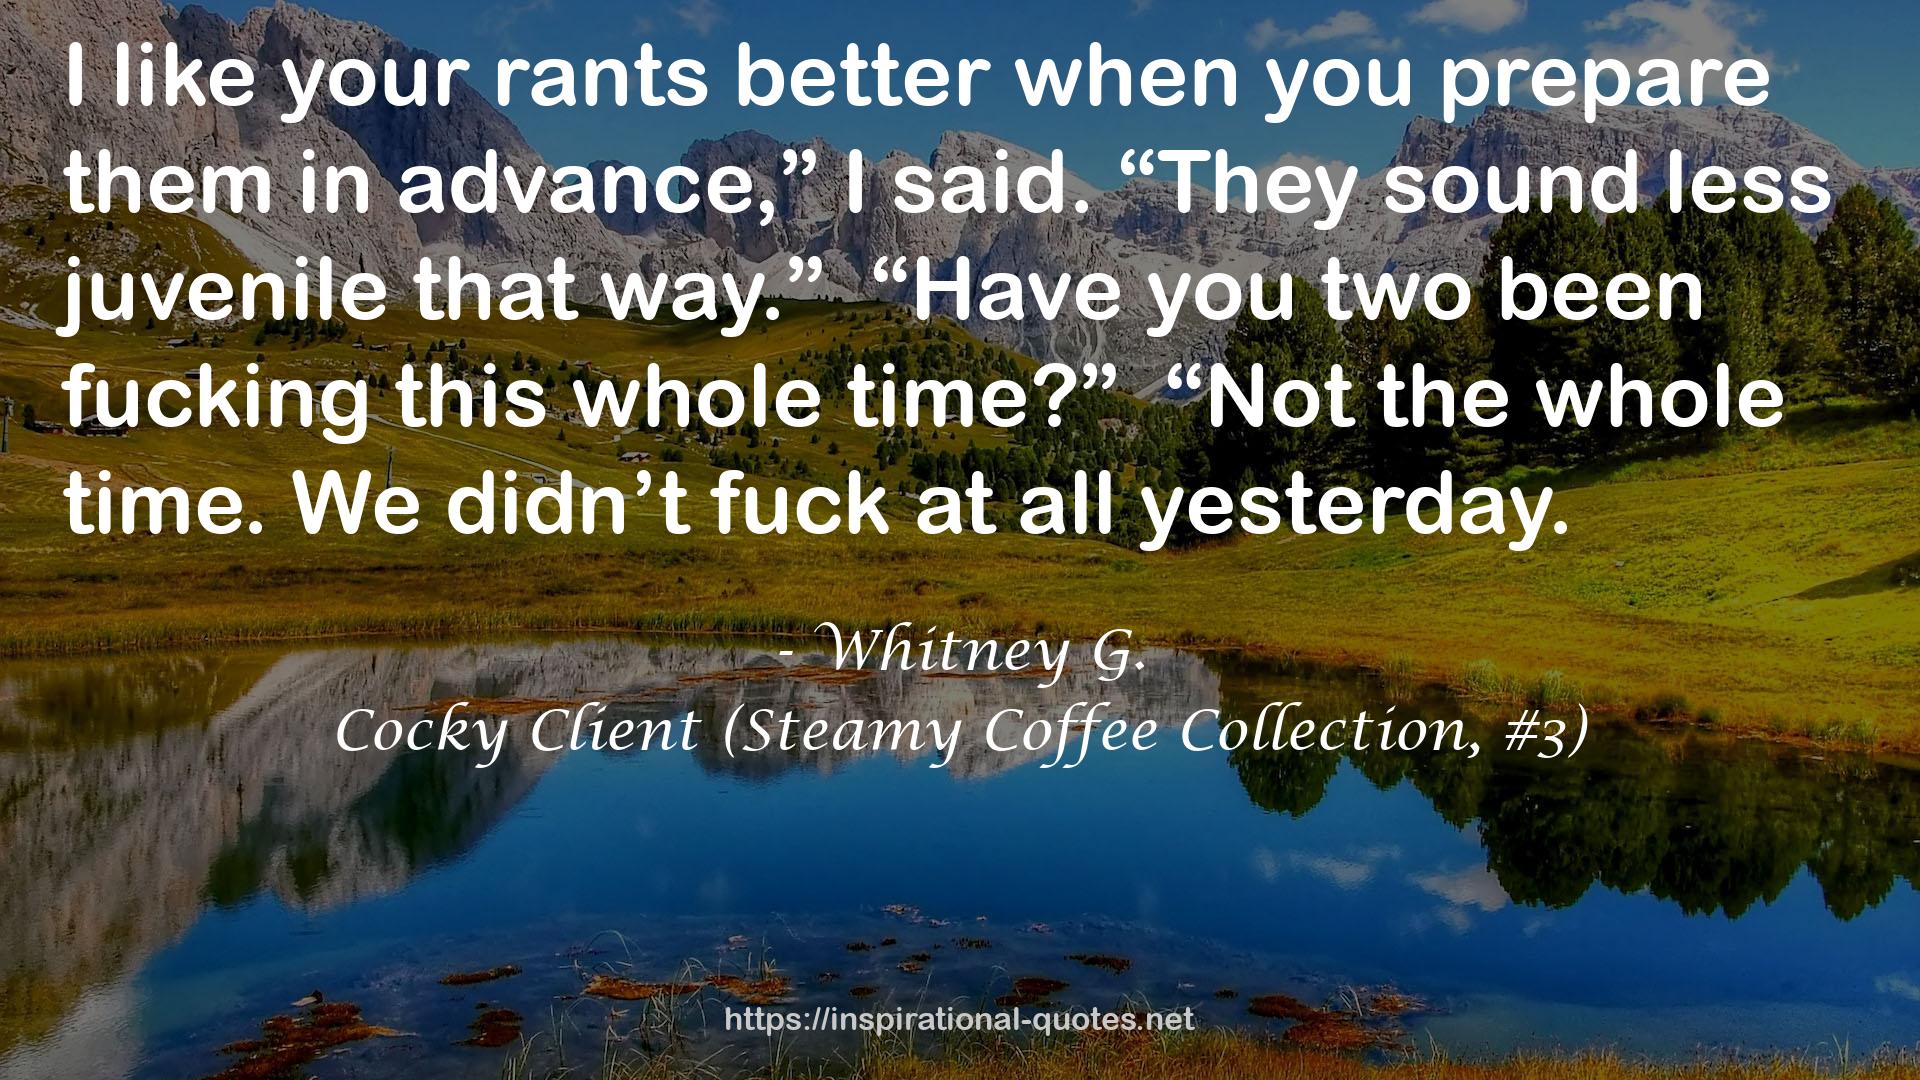 Cocky Client (Steamy Coffee Collection, #3) QUOTES